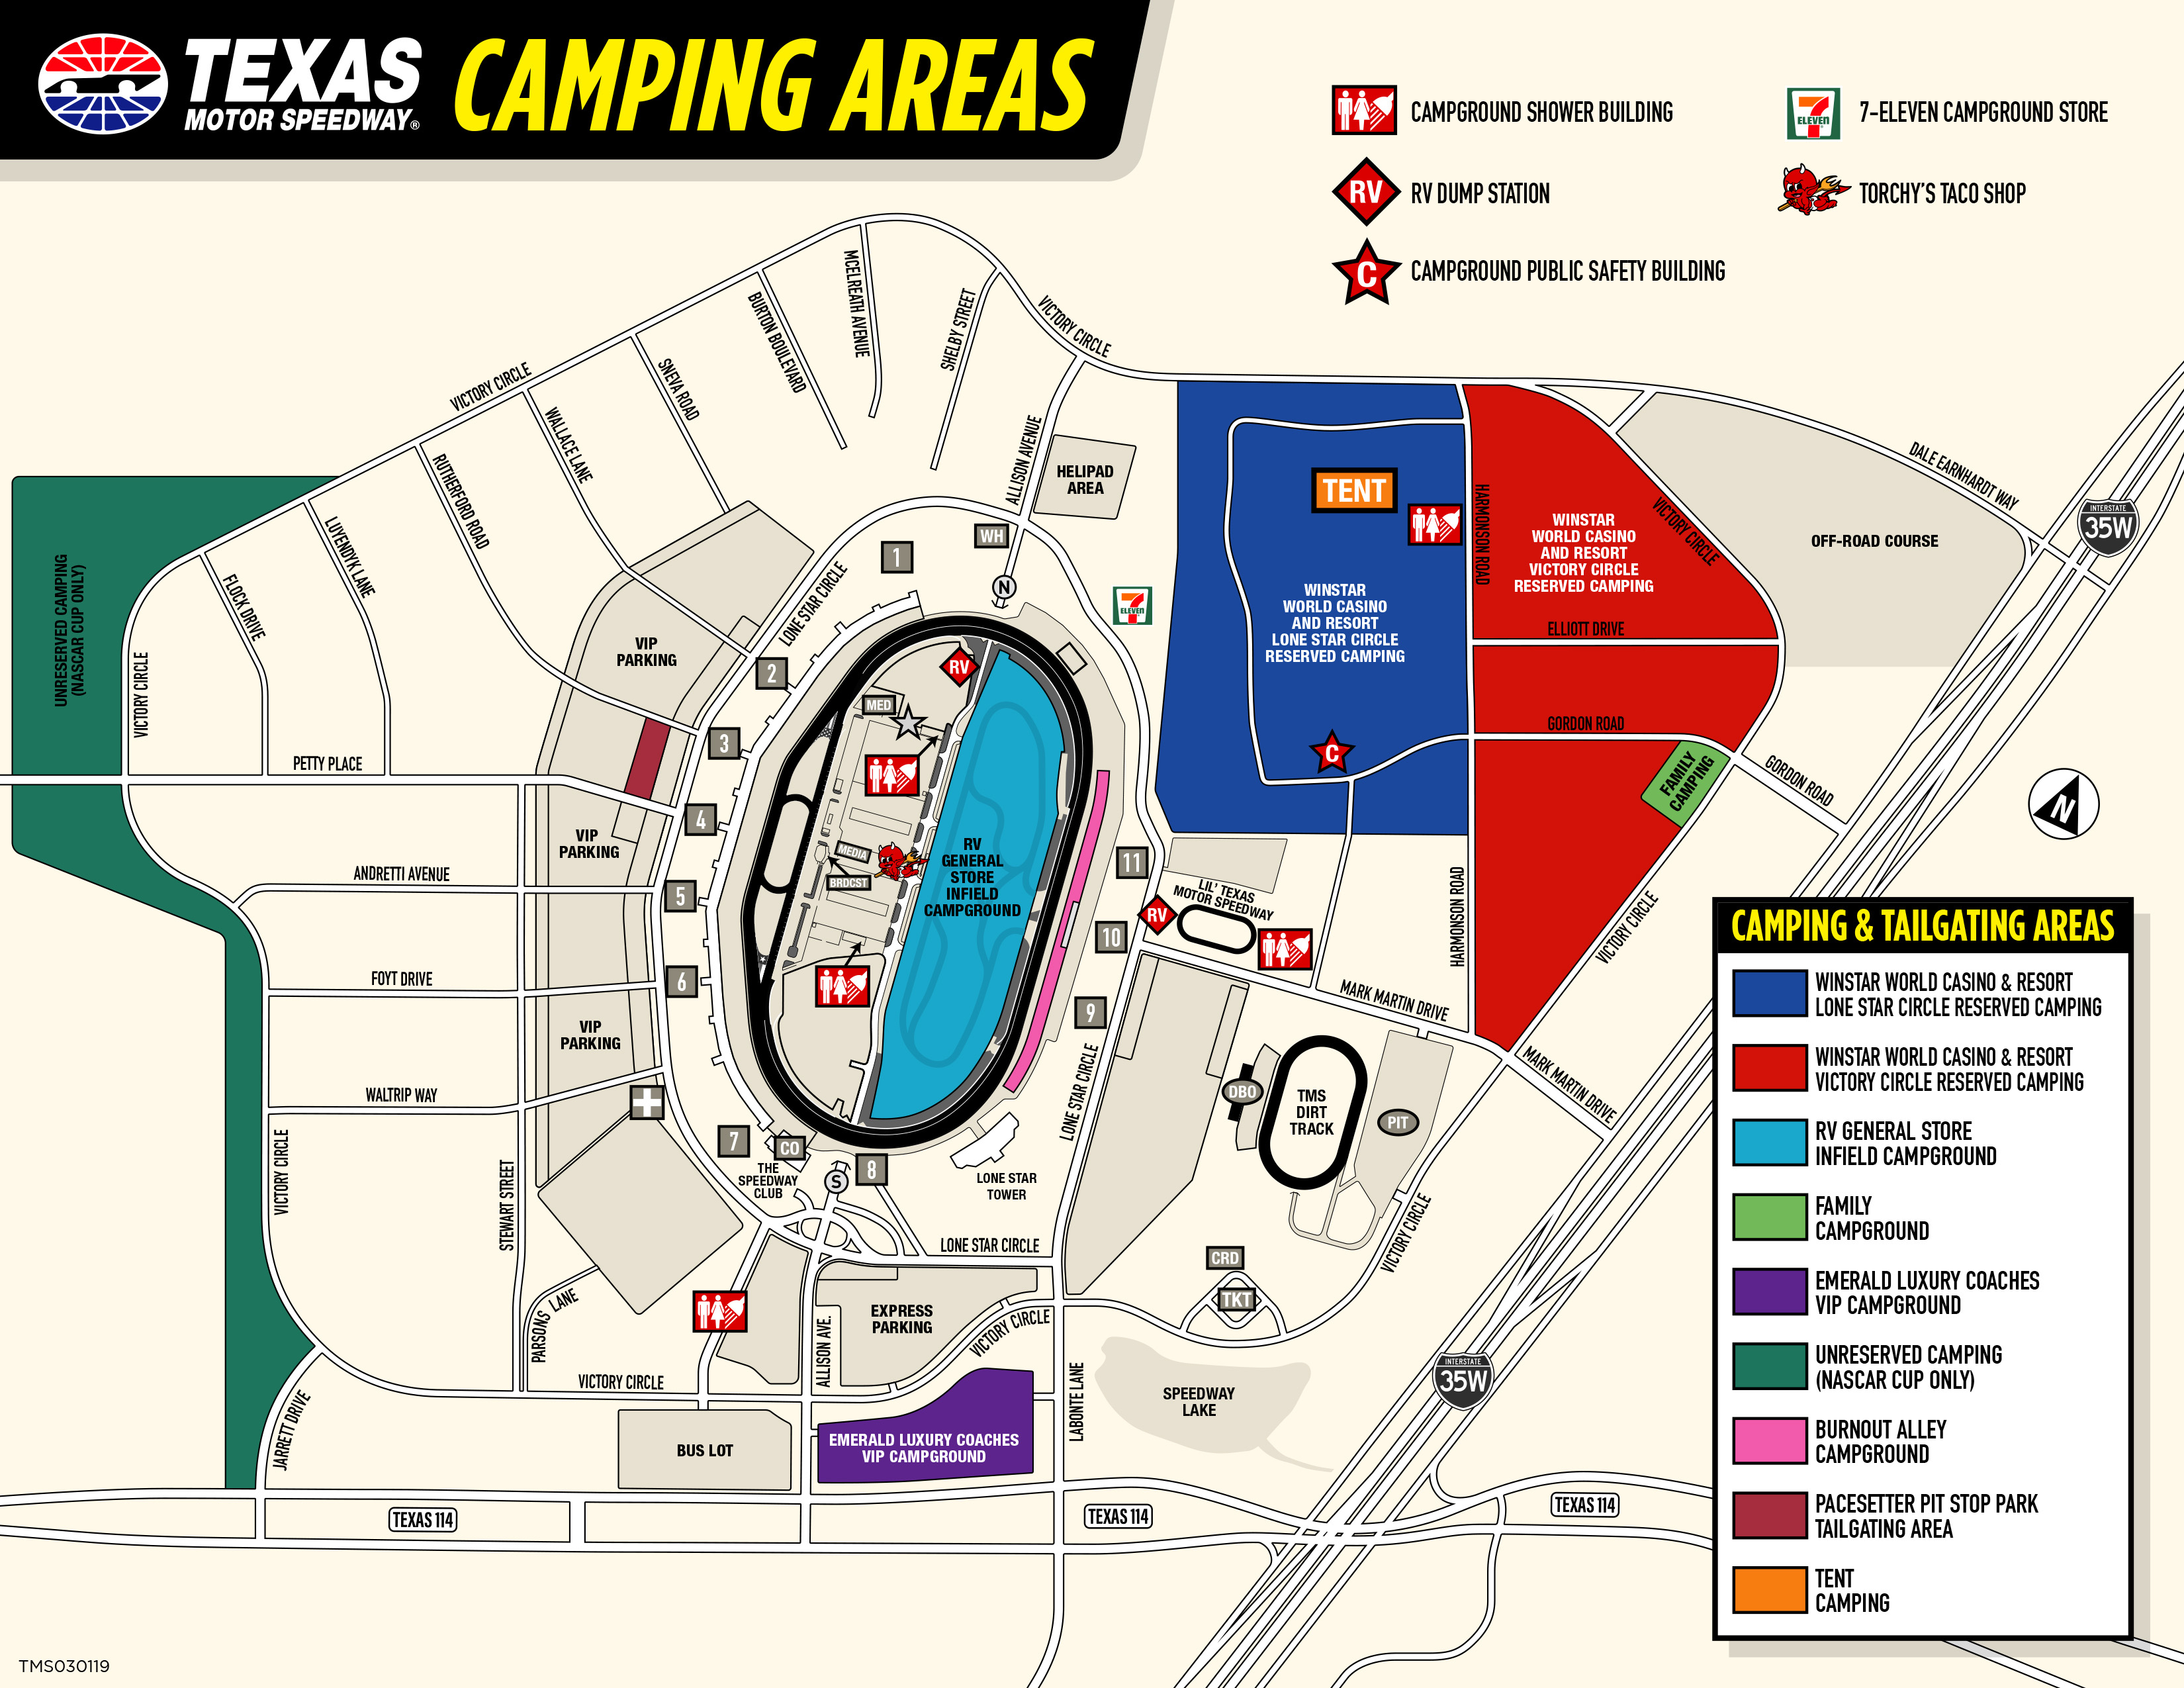 Rv General Store Infield Campground - Texas Motor Speedway Parking Map